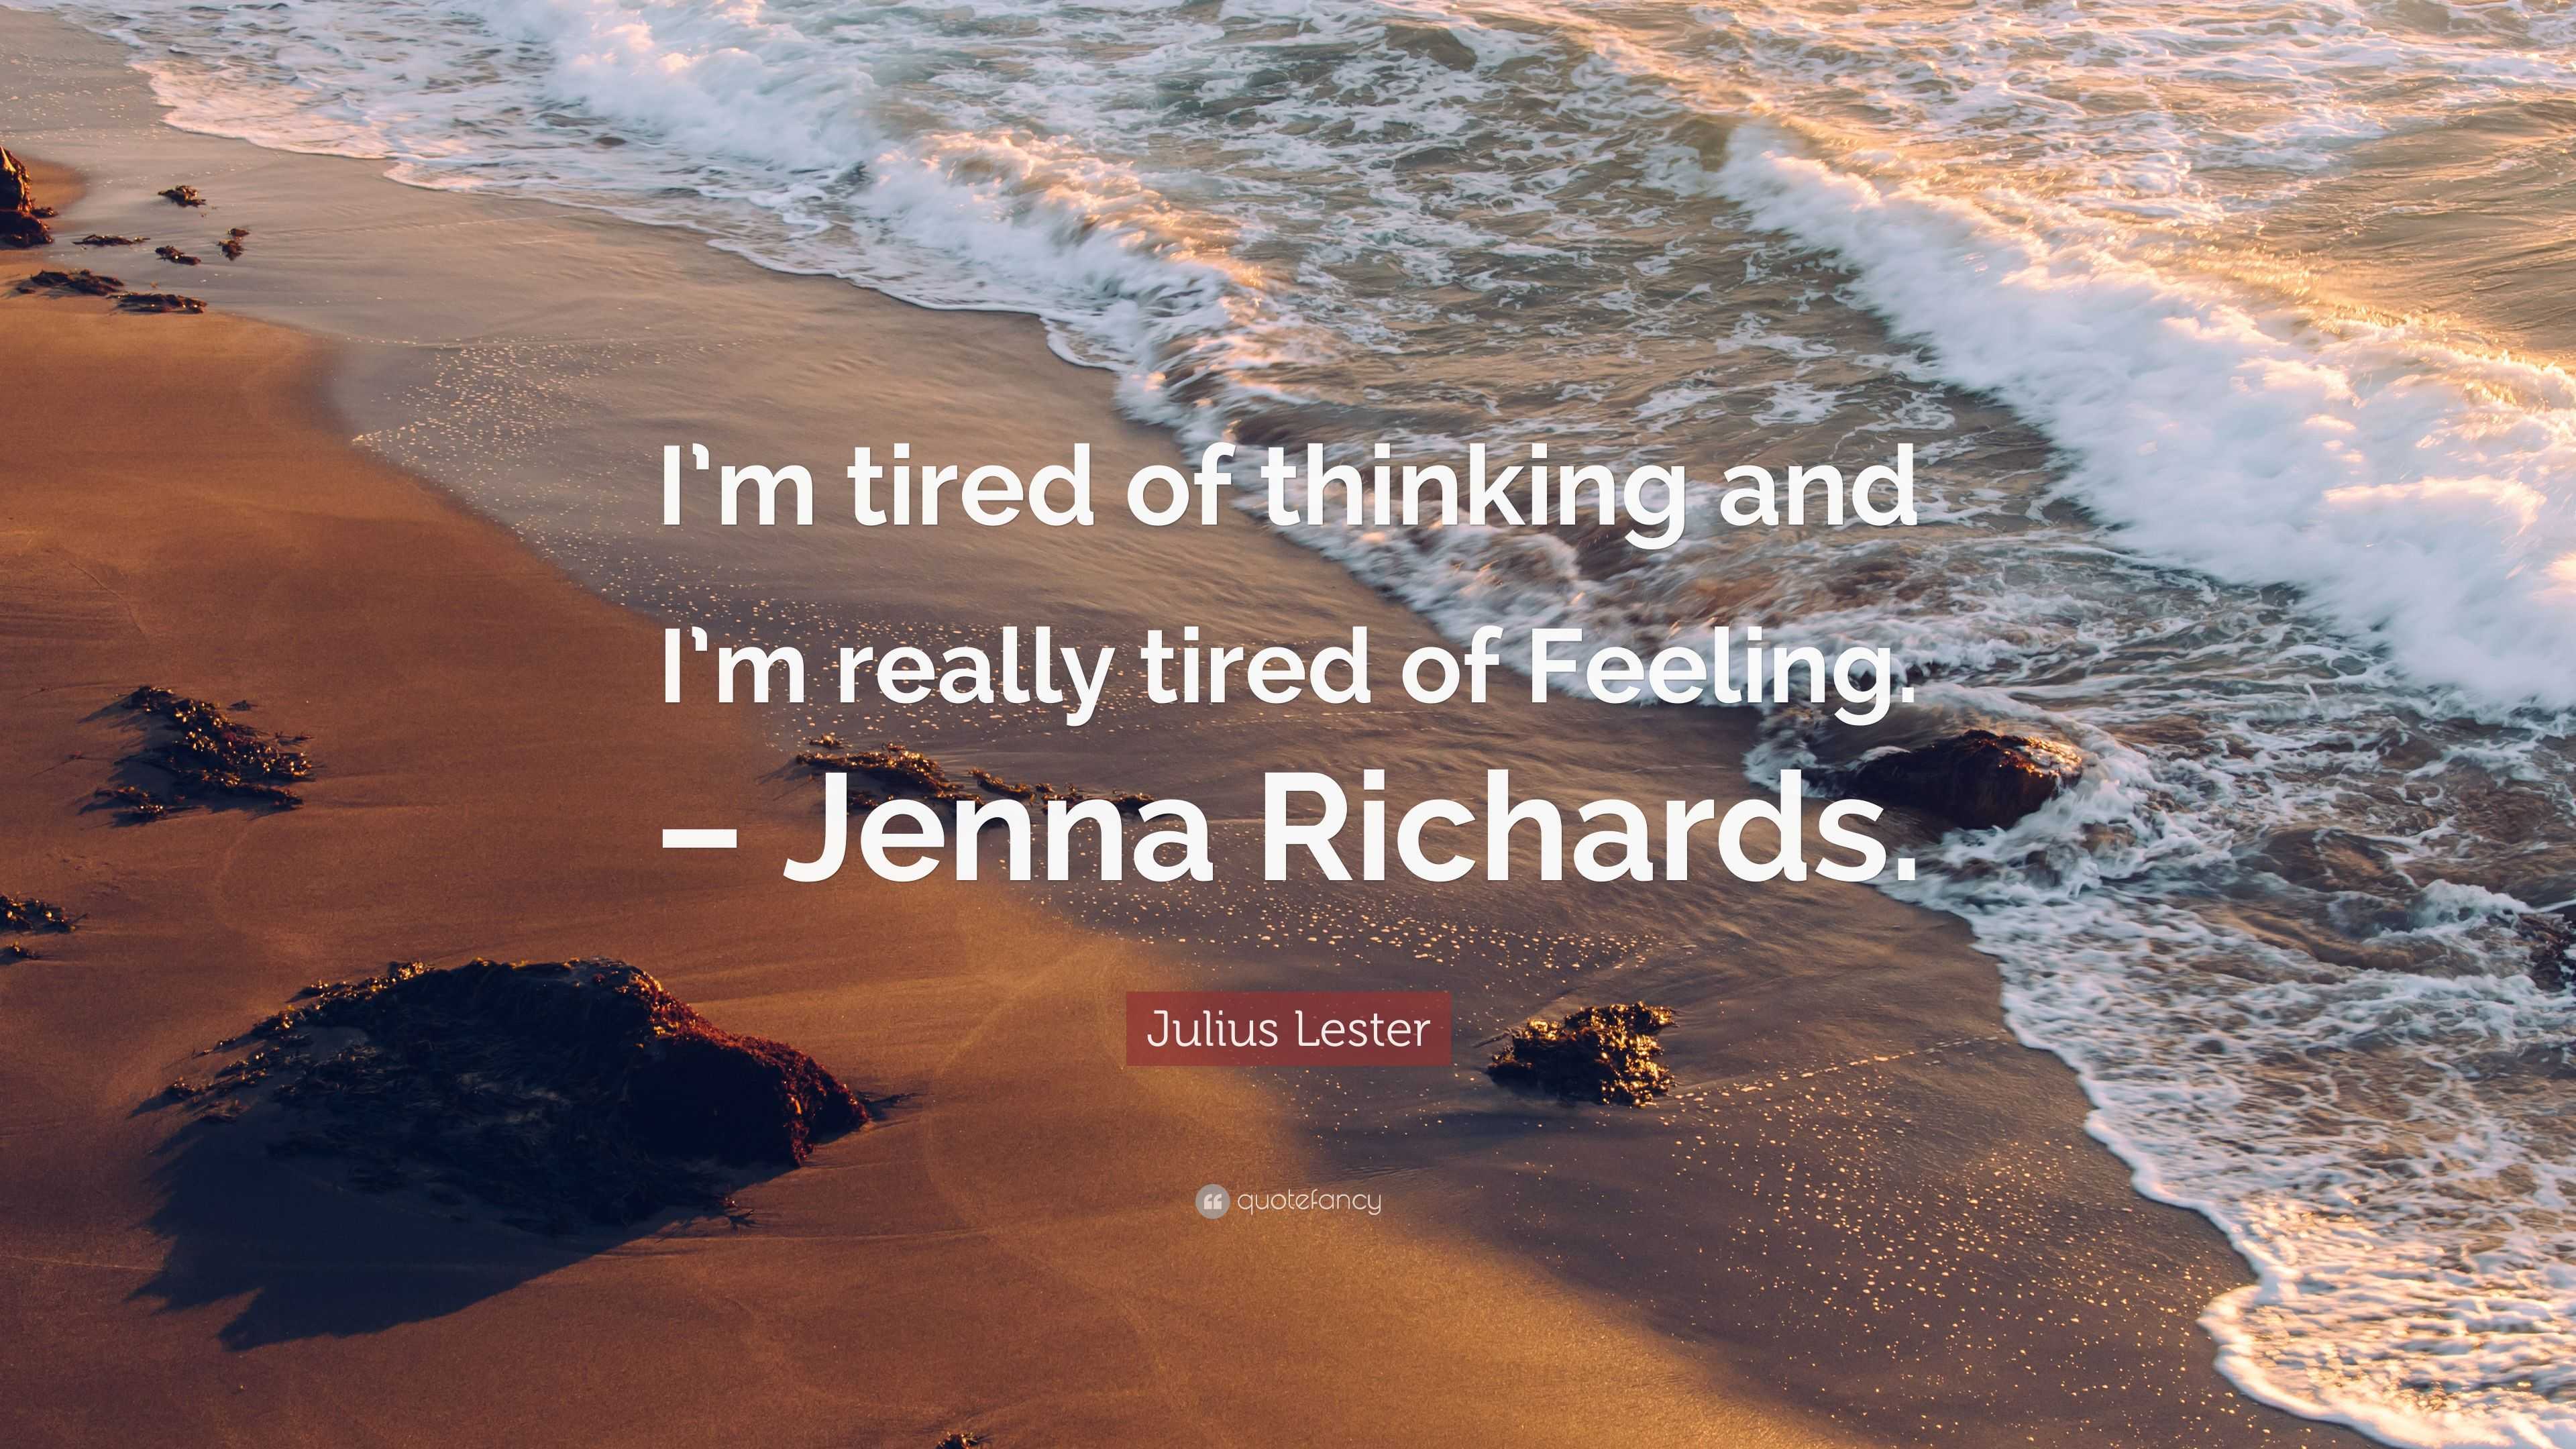 Julius Lester Quote: “I’m tired of thinking and I’m really tired of